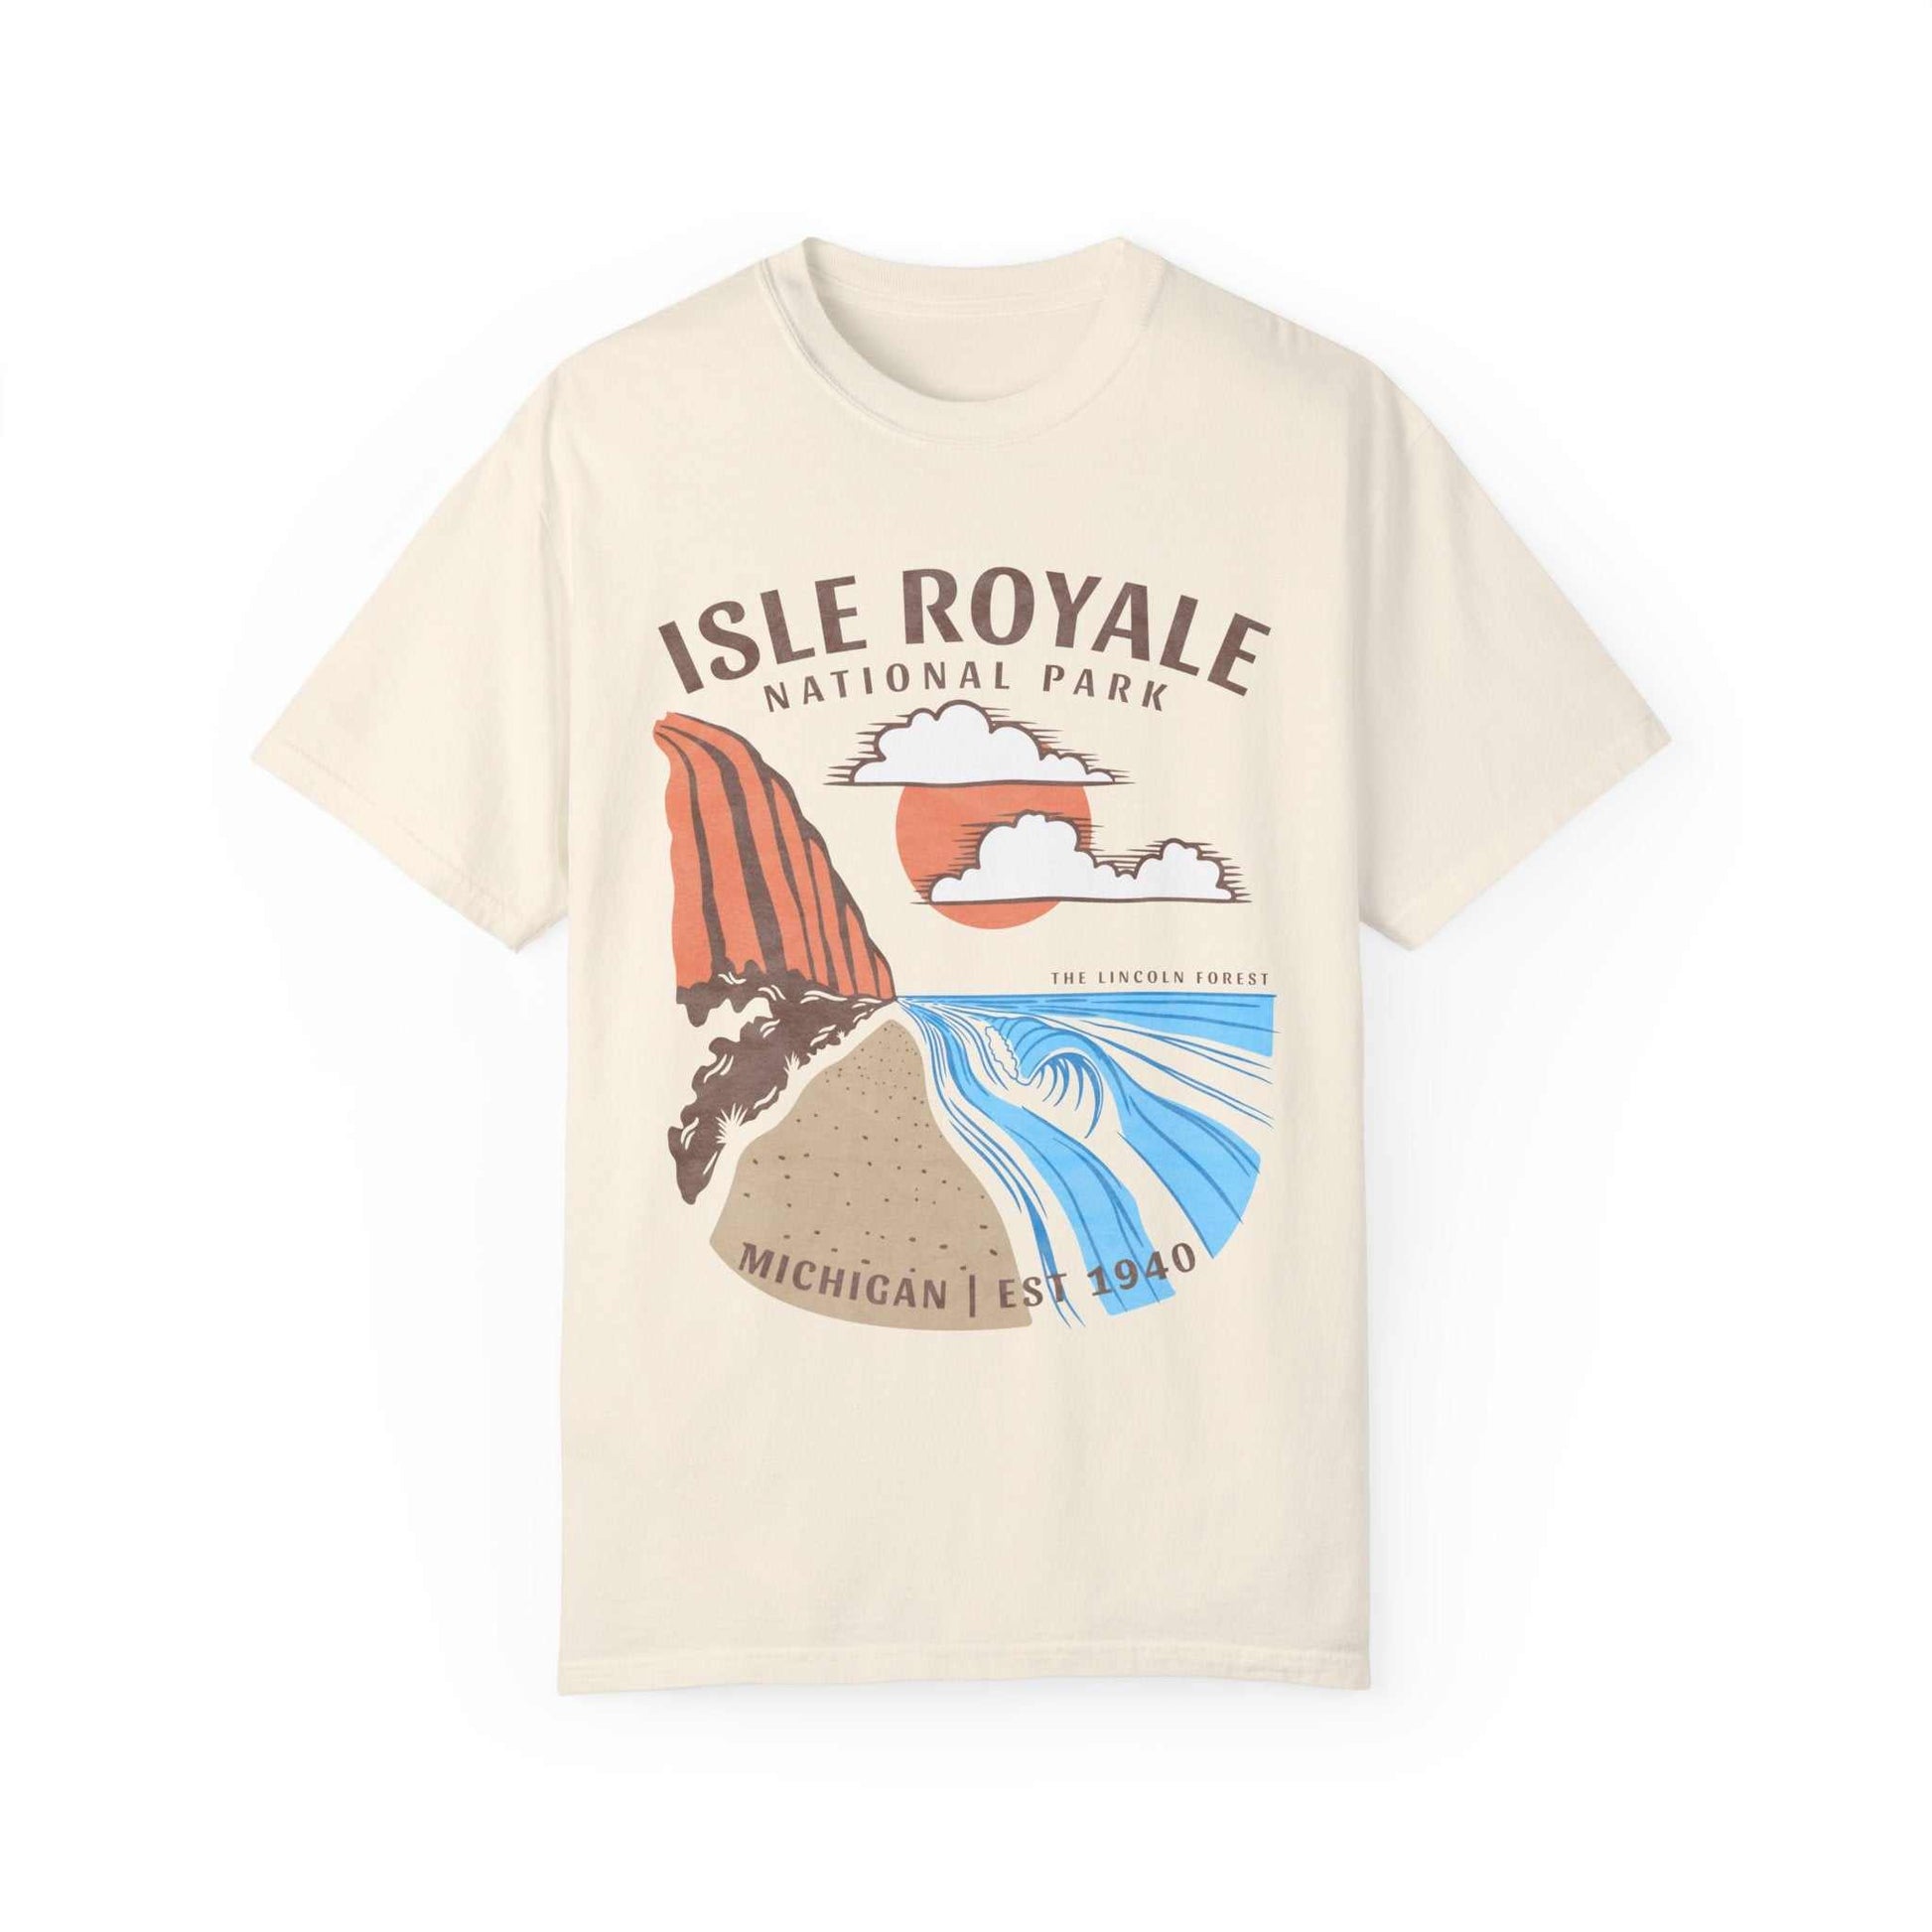 Isle Royale National Park ShirtDetails:
- 100% jersey cotton - light weight ultra soft fabric - unisex sizing
The Lincoln Forest cares deeply about the planet and creating a business that gives ba